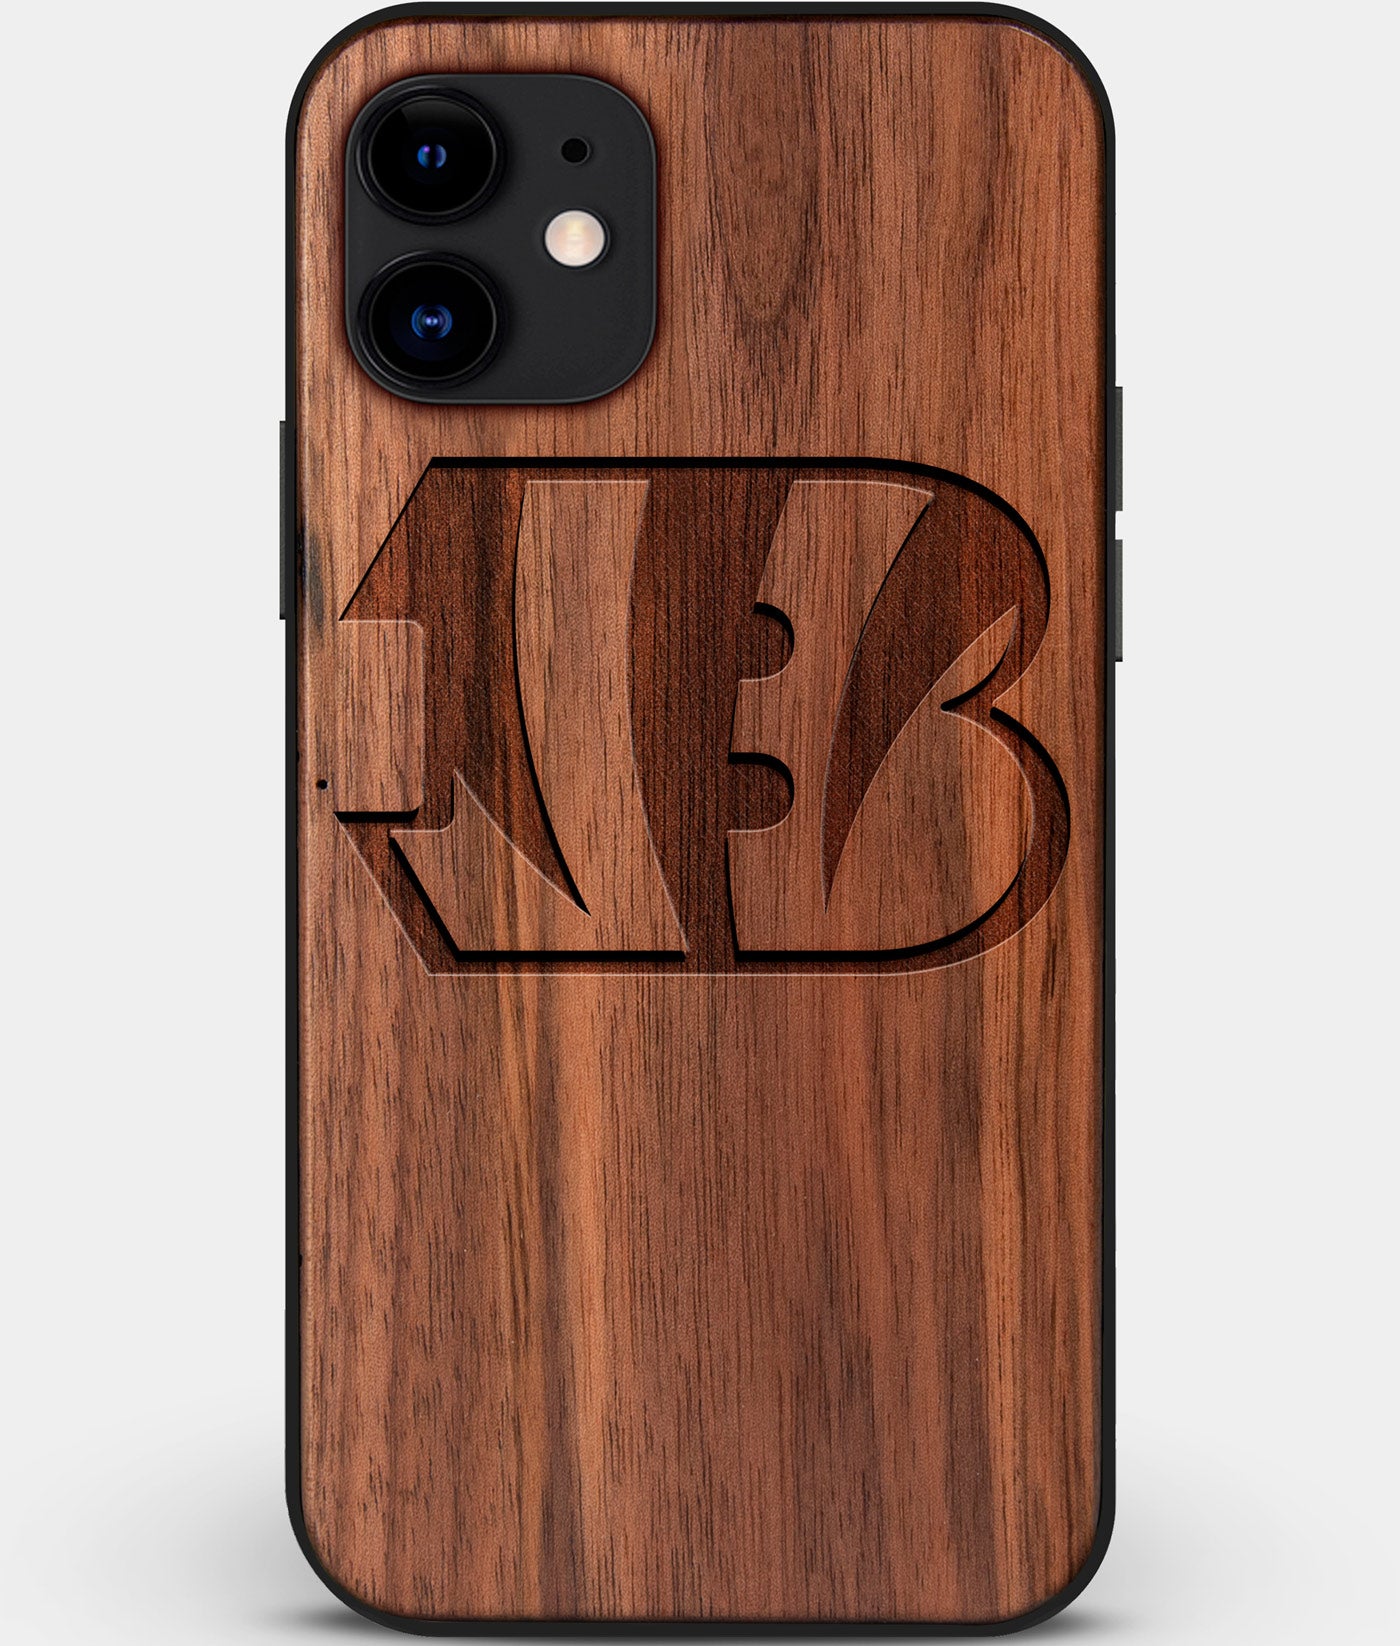 Custom Carved Wood Cincinnati Bengals iPhone 12 Mini Case | Personalized Walnut Wood Cincinnati Bengals Cover, Birthday Gift, Gifts For Him, Monogrammed Gift For Fan | by Engraved In Nature